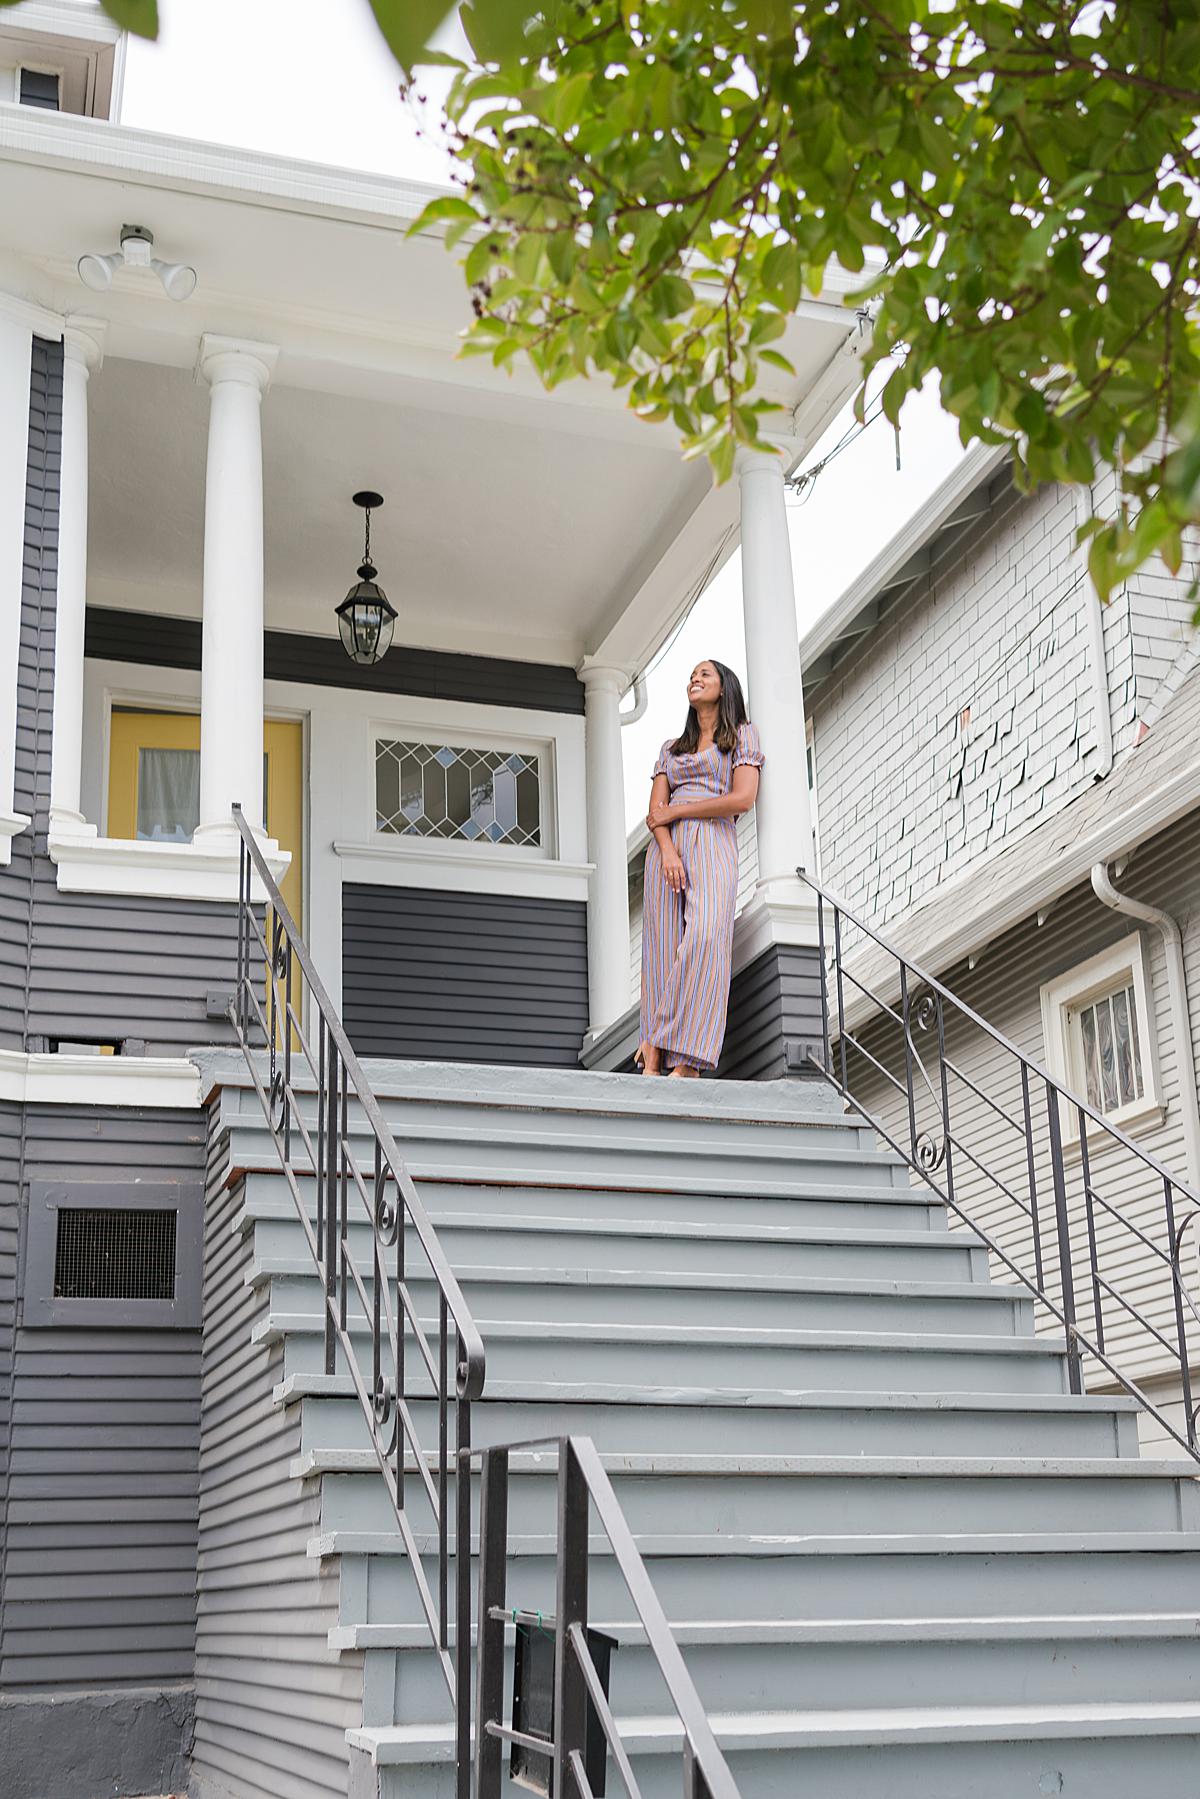 Oakland brand photoshoot in historic craftsman home